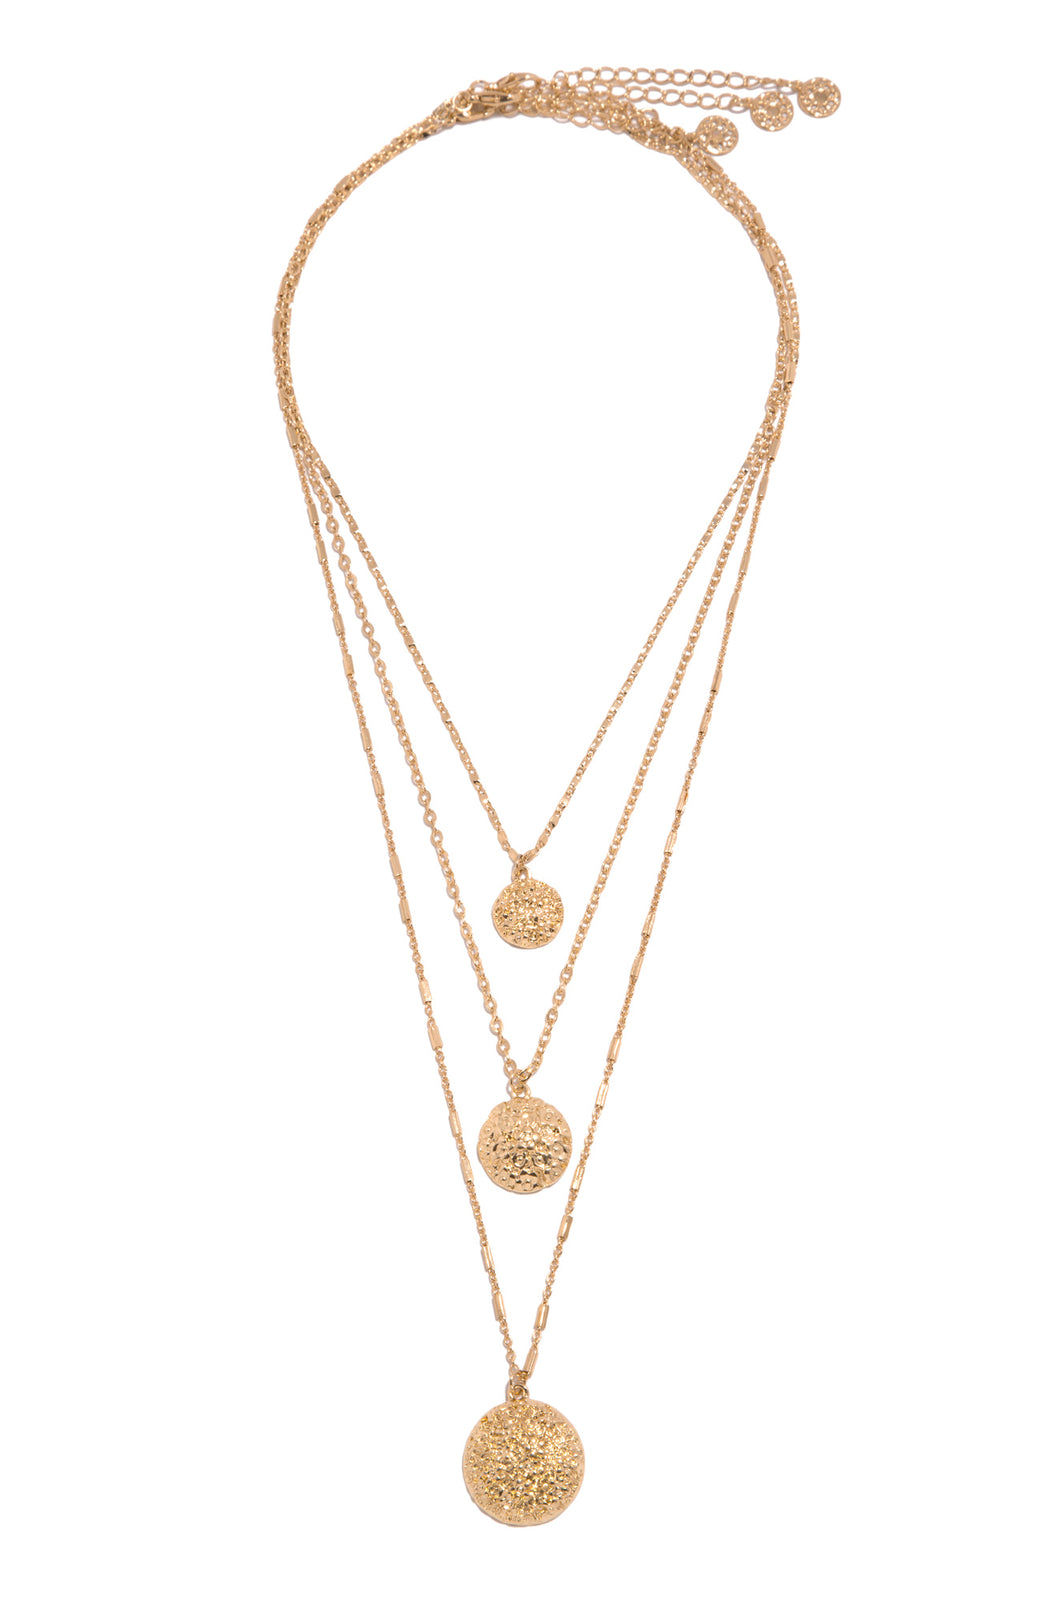 Three Piece Layered Gold-Tone Necklace